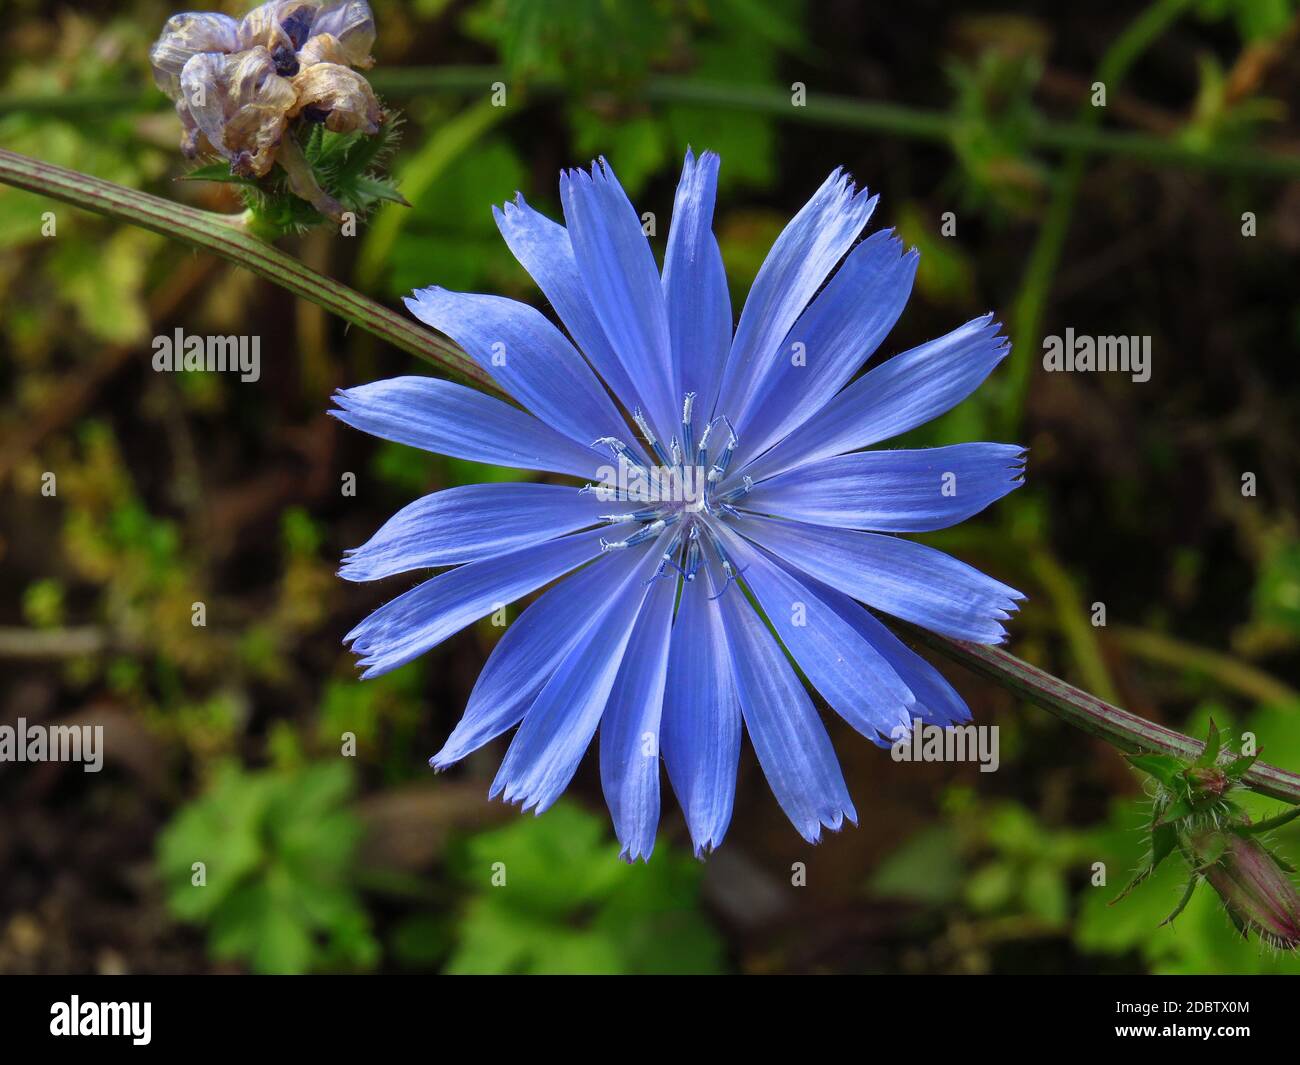 Common chicory, Cichorium intybus, blue blossom in close up Stock Photo